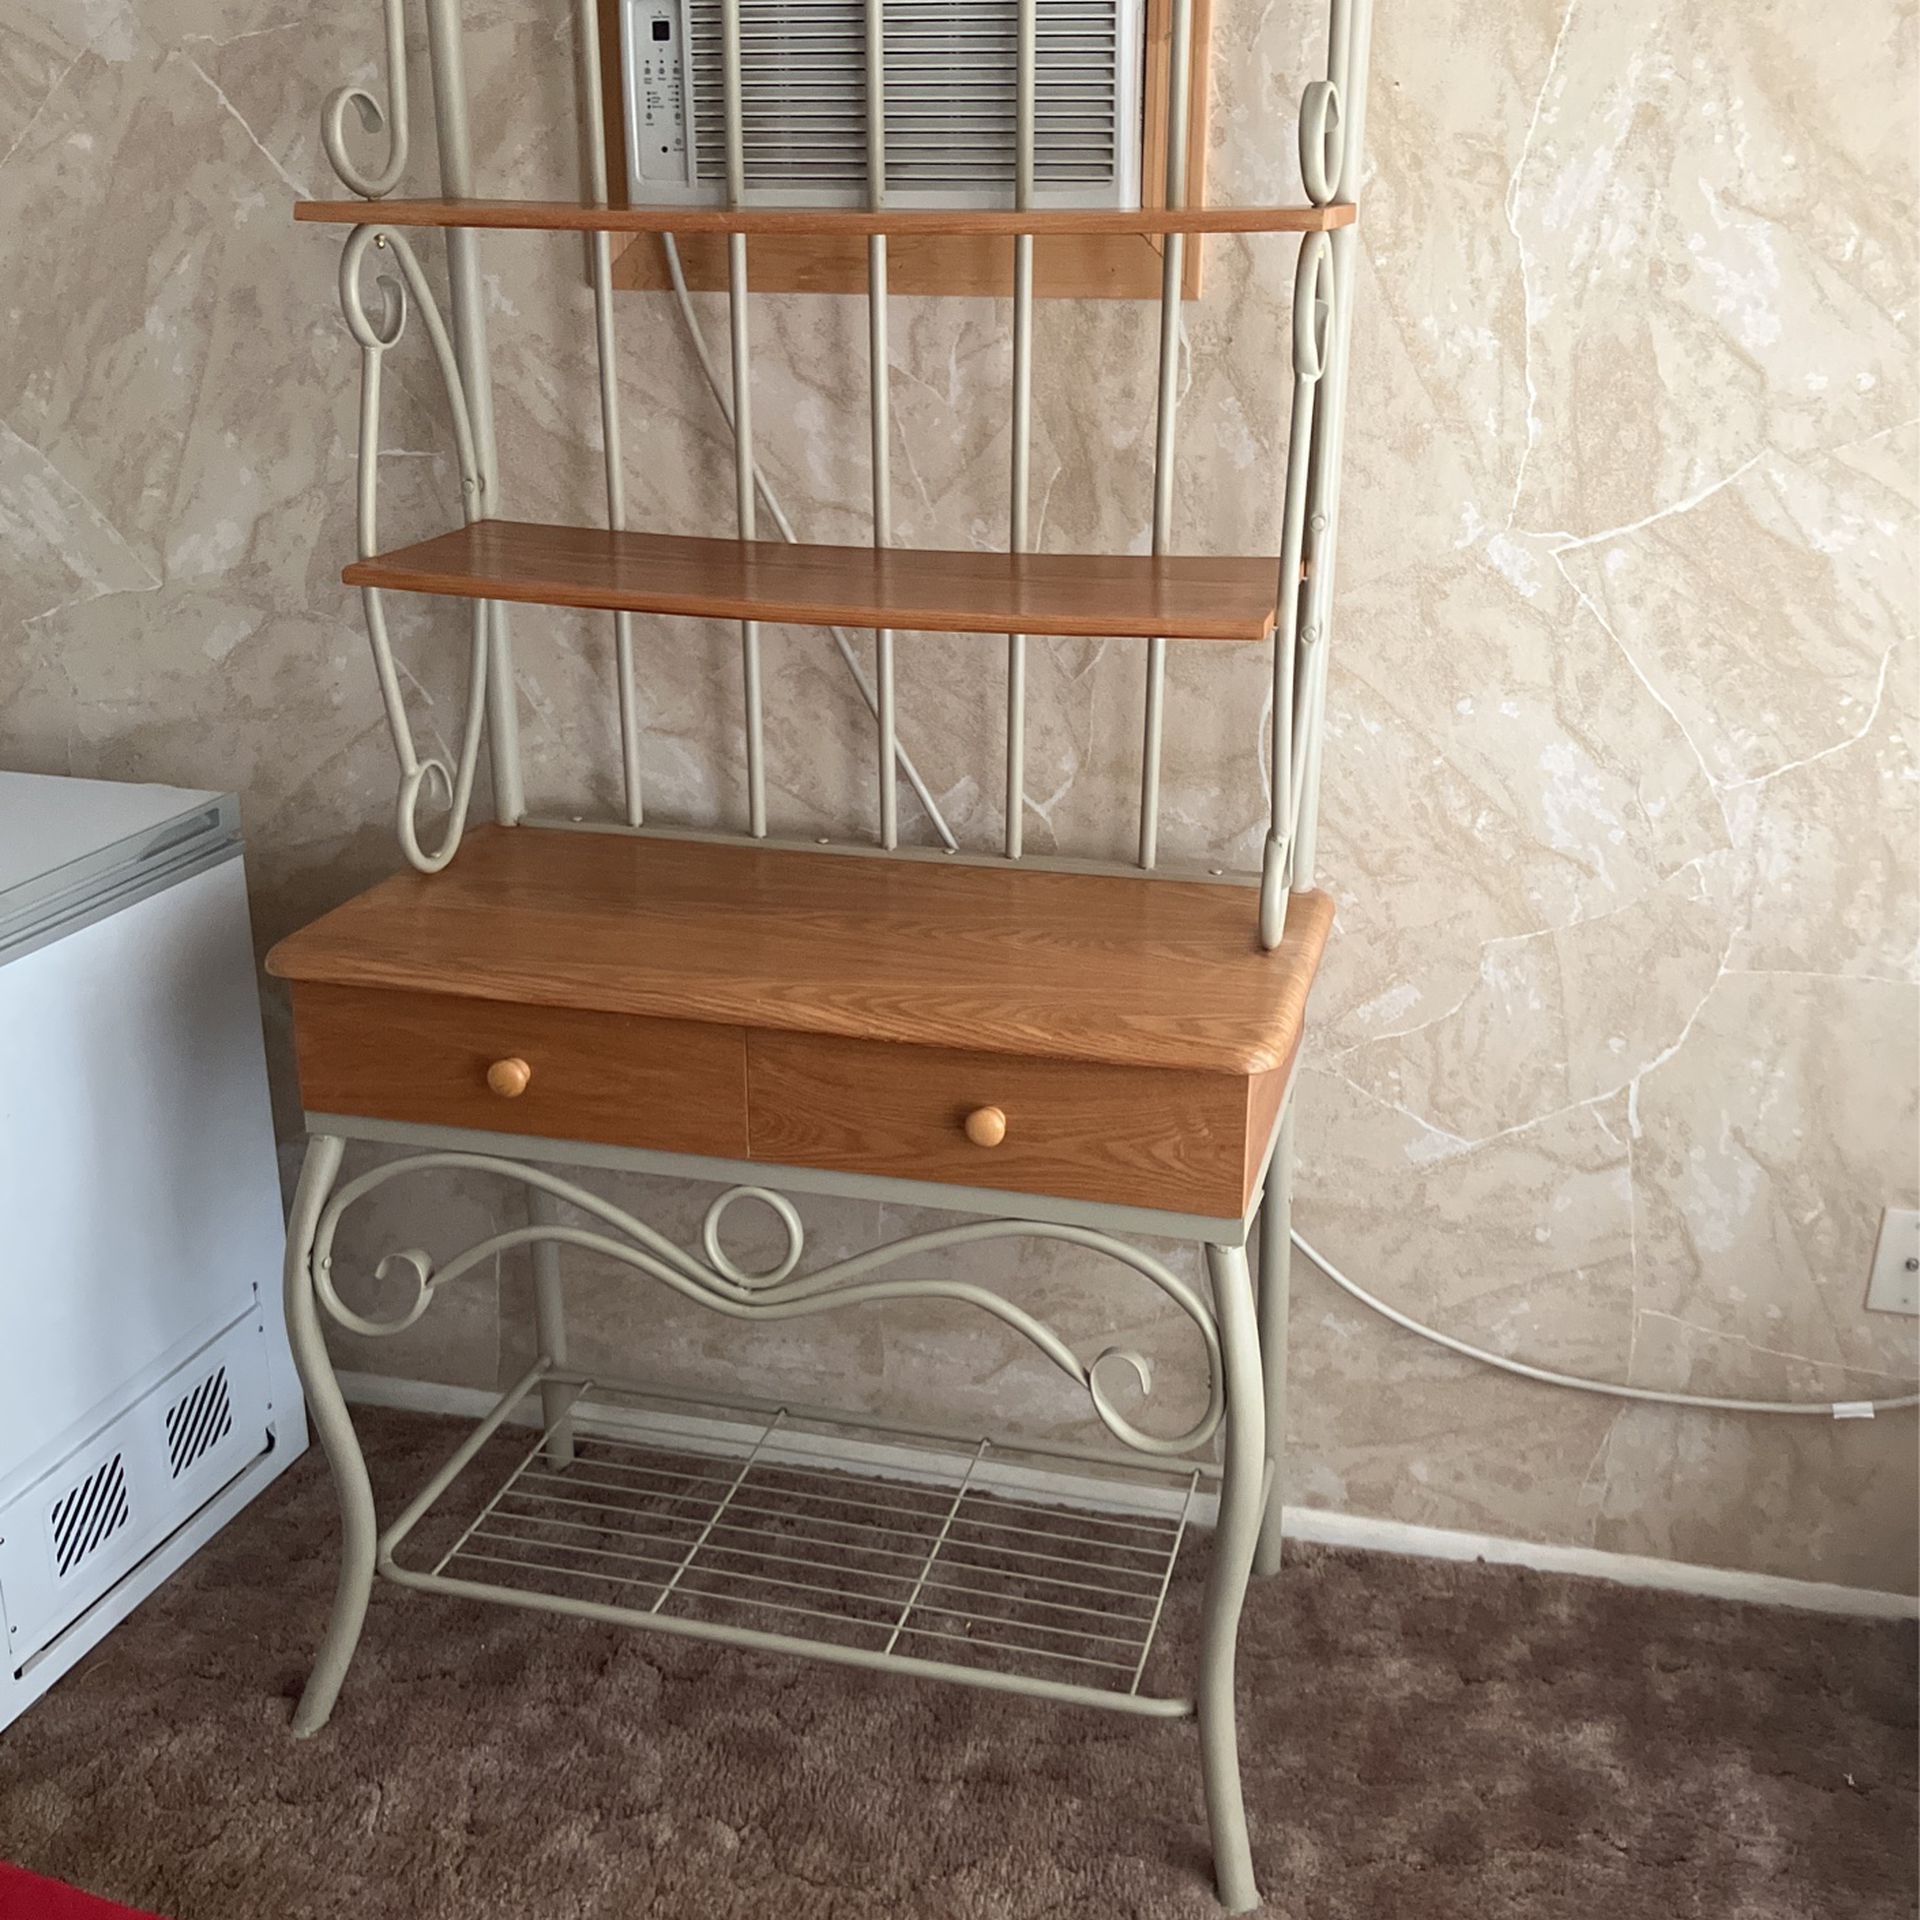 6 Foot Tall Bakers Rack With Drawers 